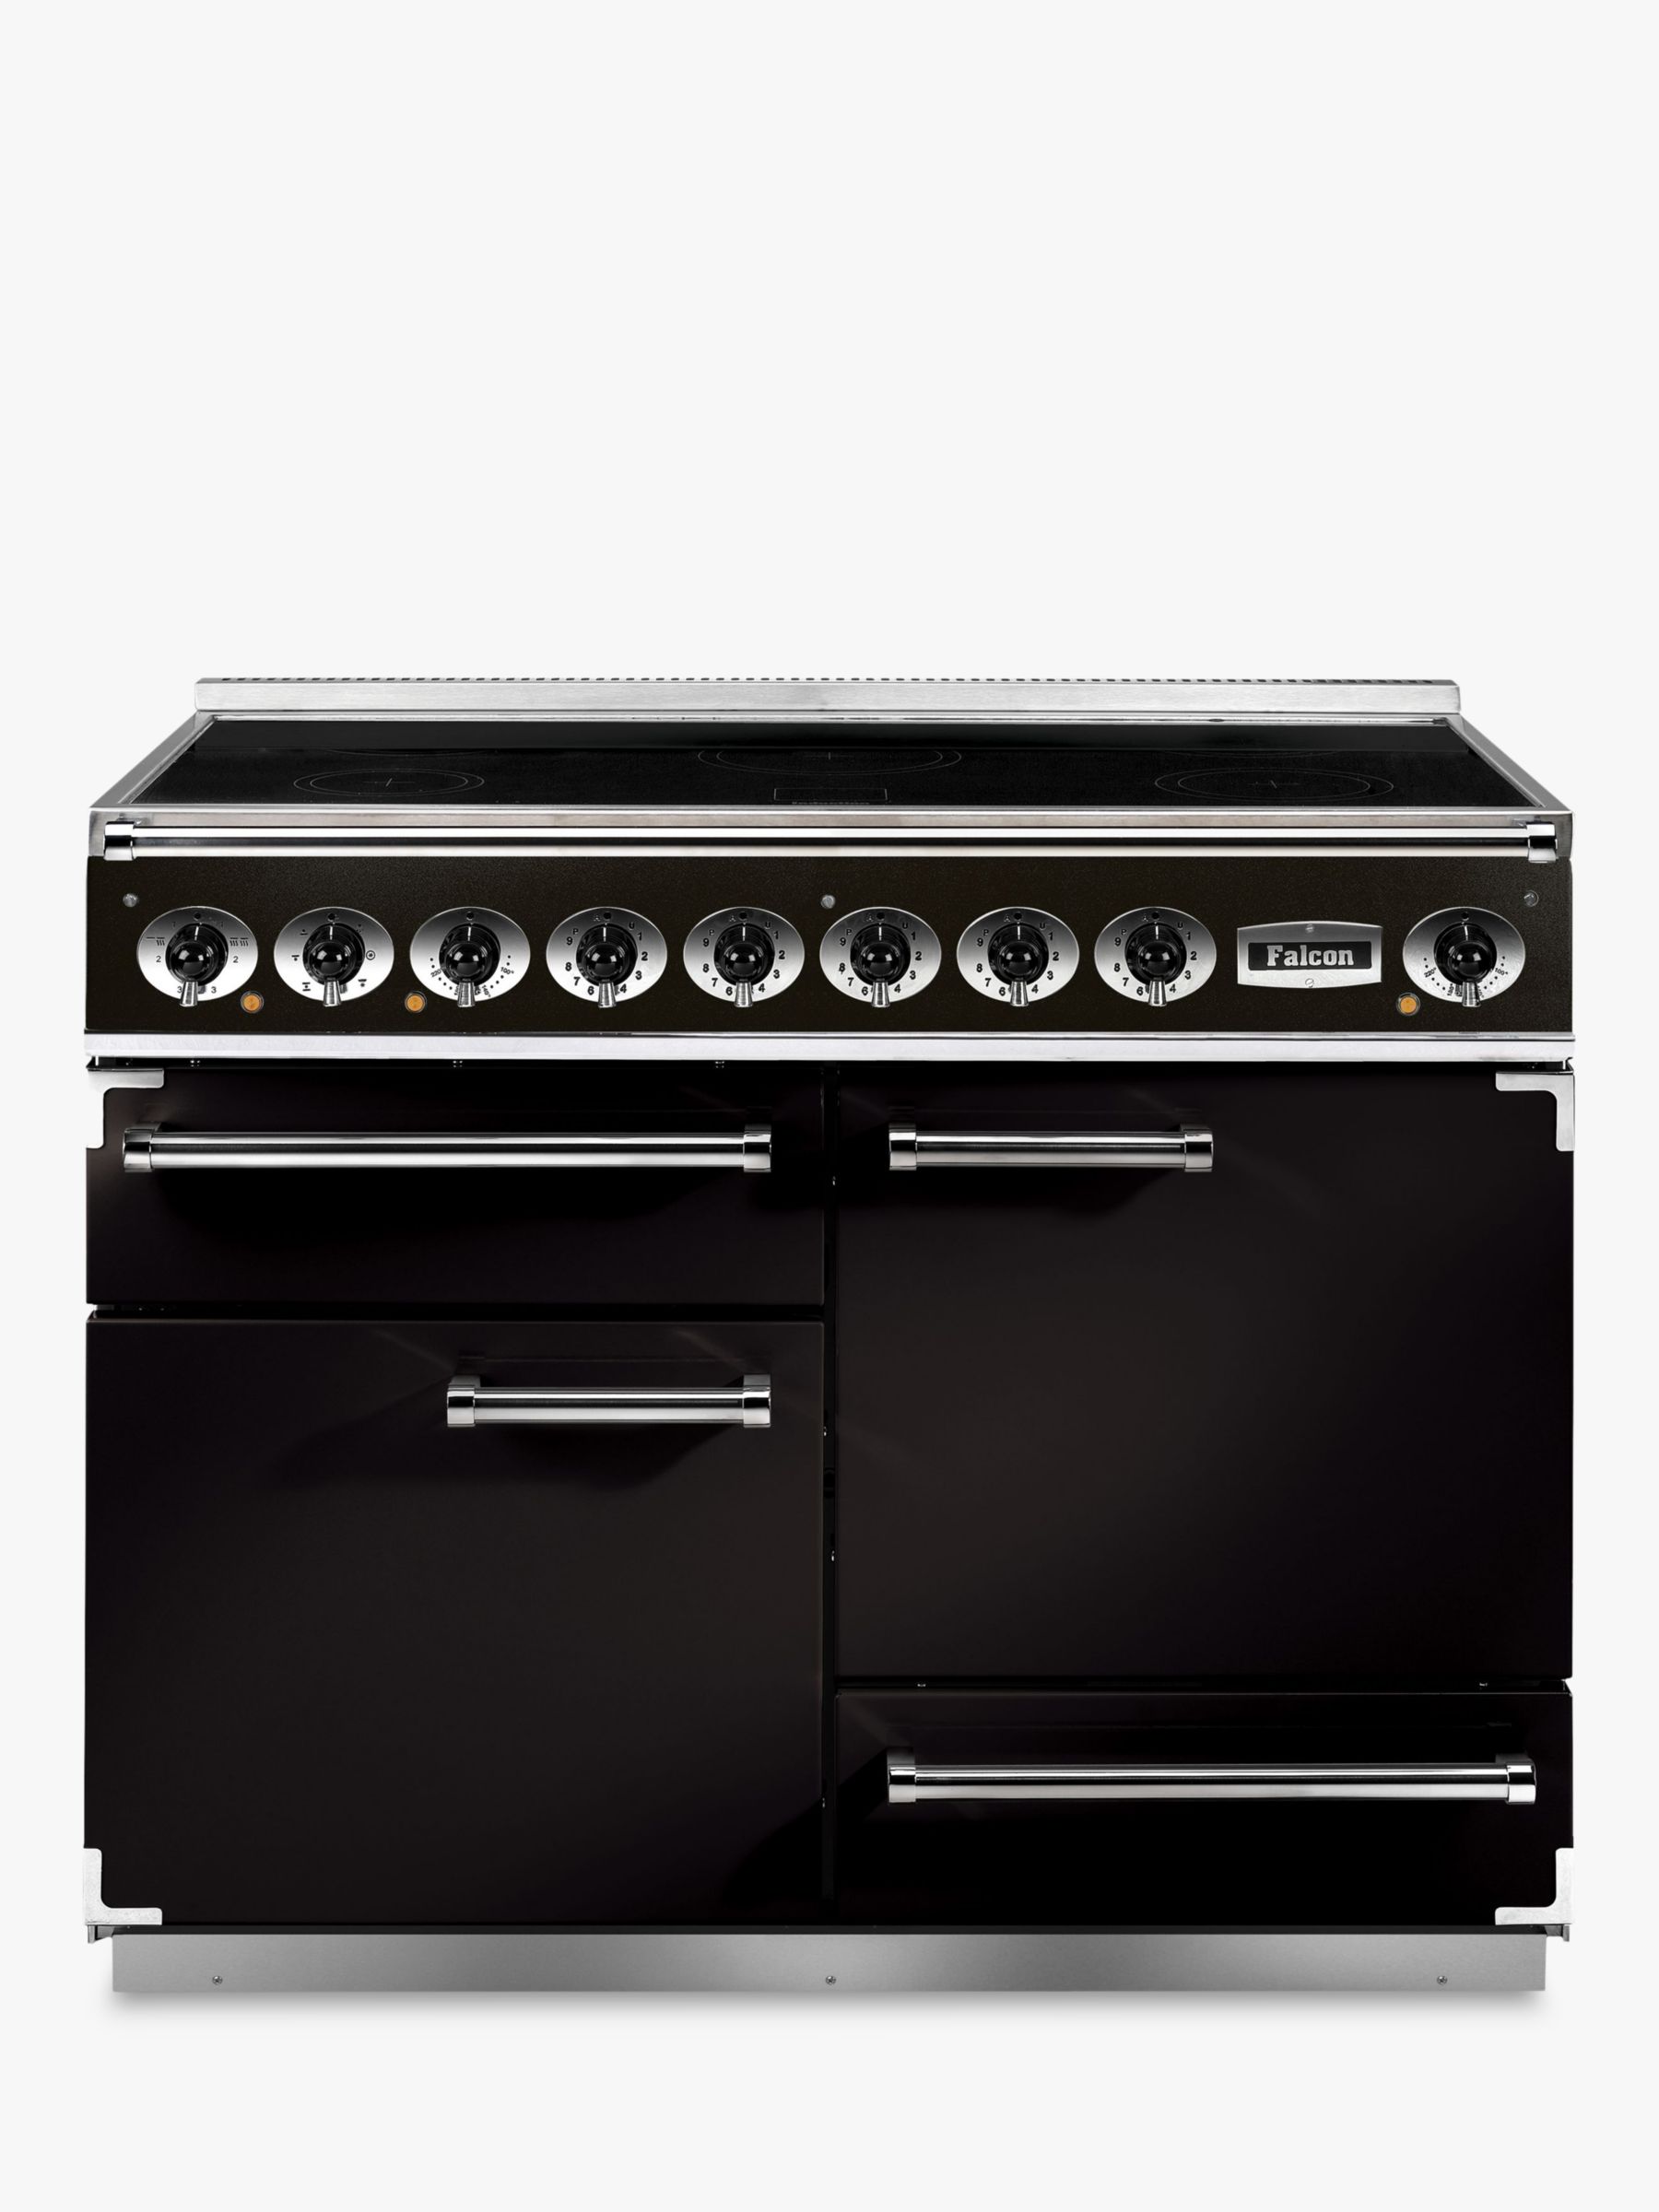 Falcon 1092 Deluxe Induction Hob Range Cooker Black At John Lewis